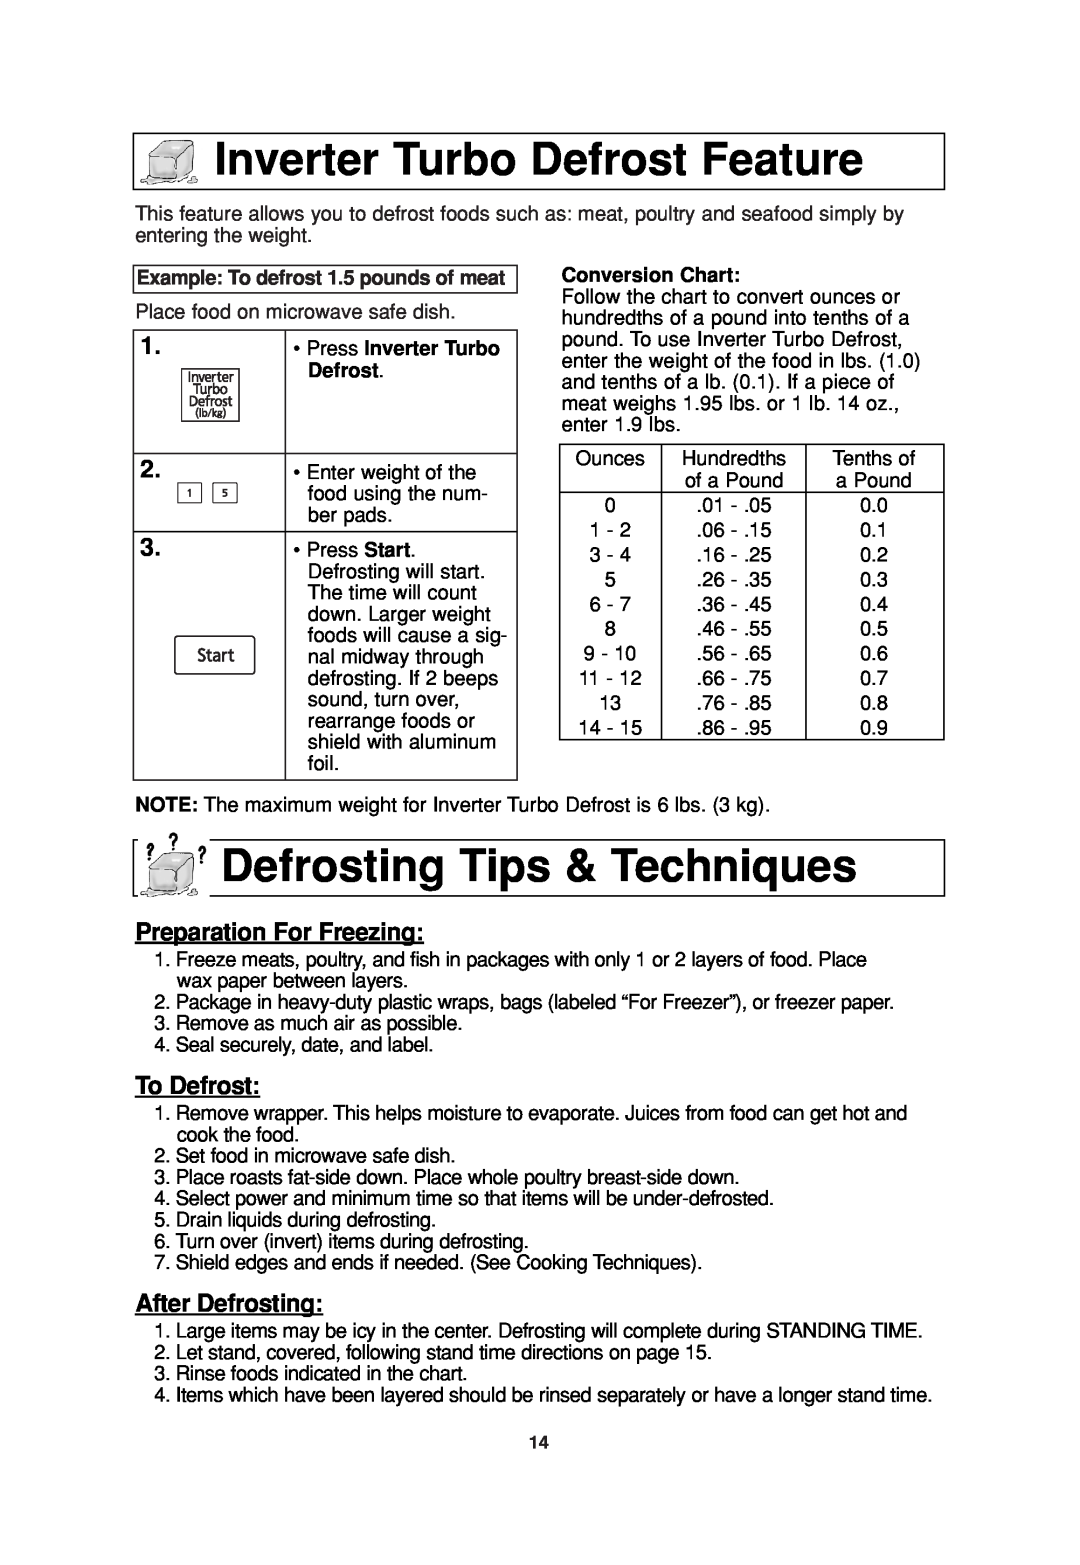 Panasonic NN-SN960S Inverter Turbo Defrost Feature, Defrosting Tips & Techniques, Preparation For Freezing, To Defrost 